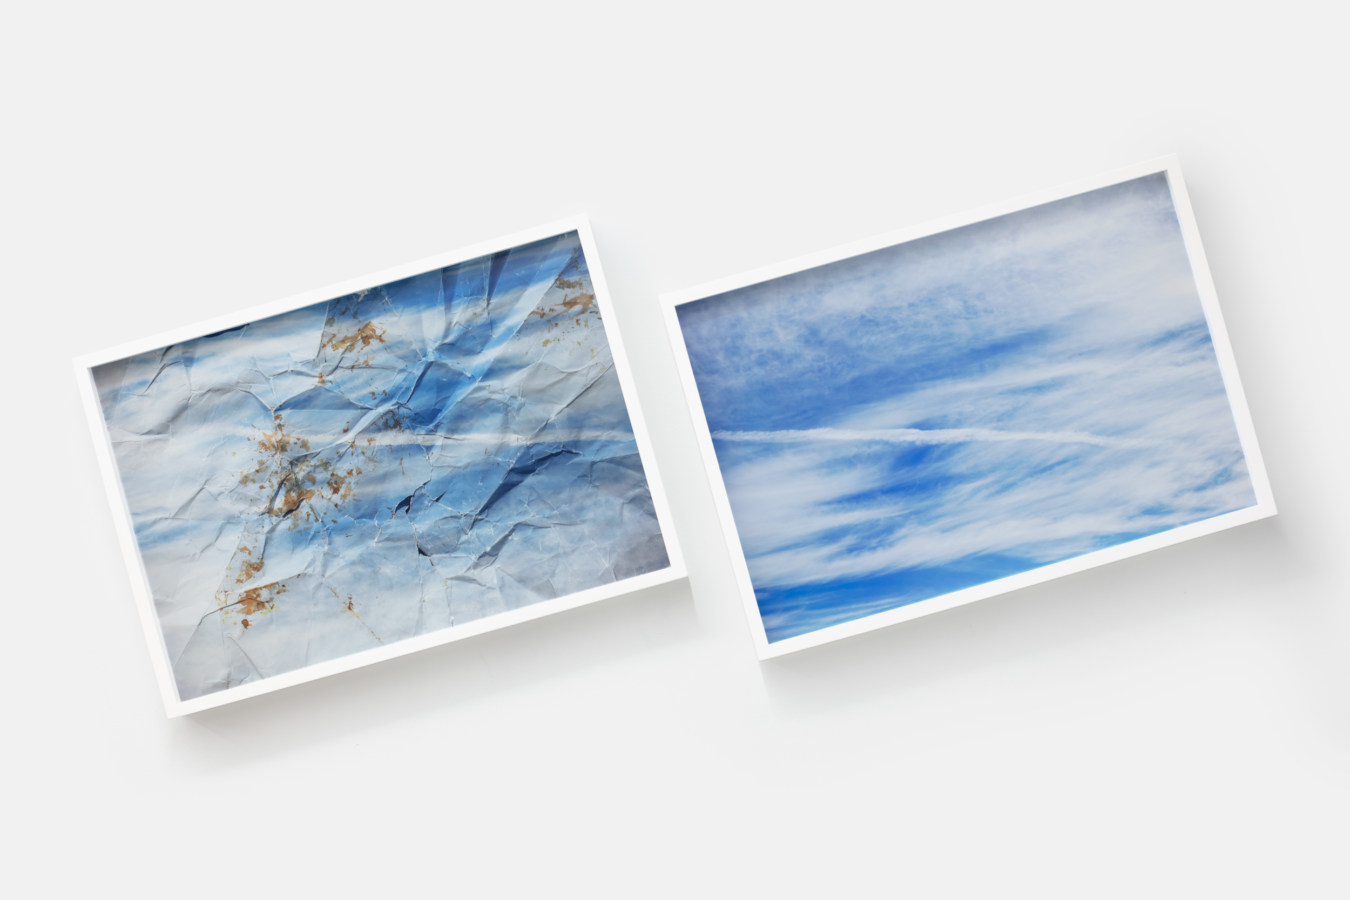 Two framed color photographs of a blue sky with wispy clouds hung at a tilted angle